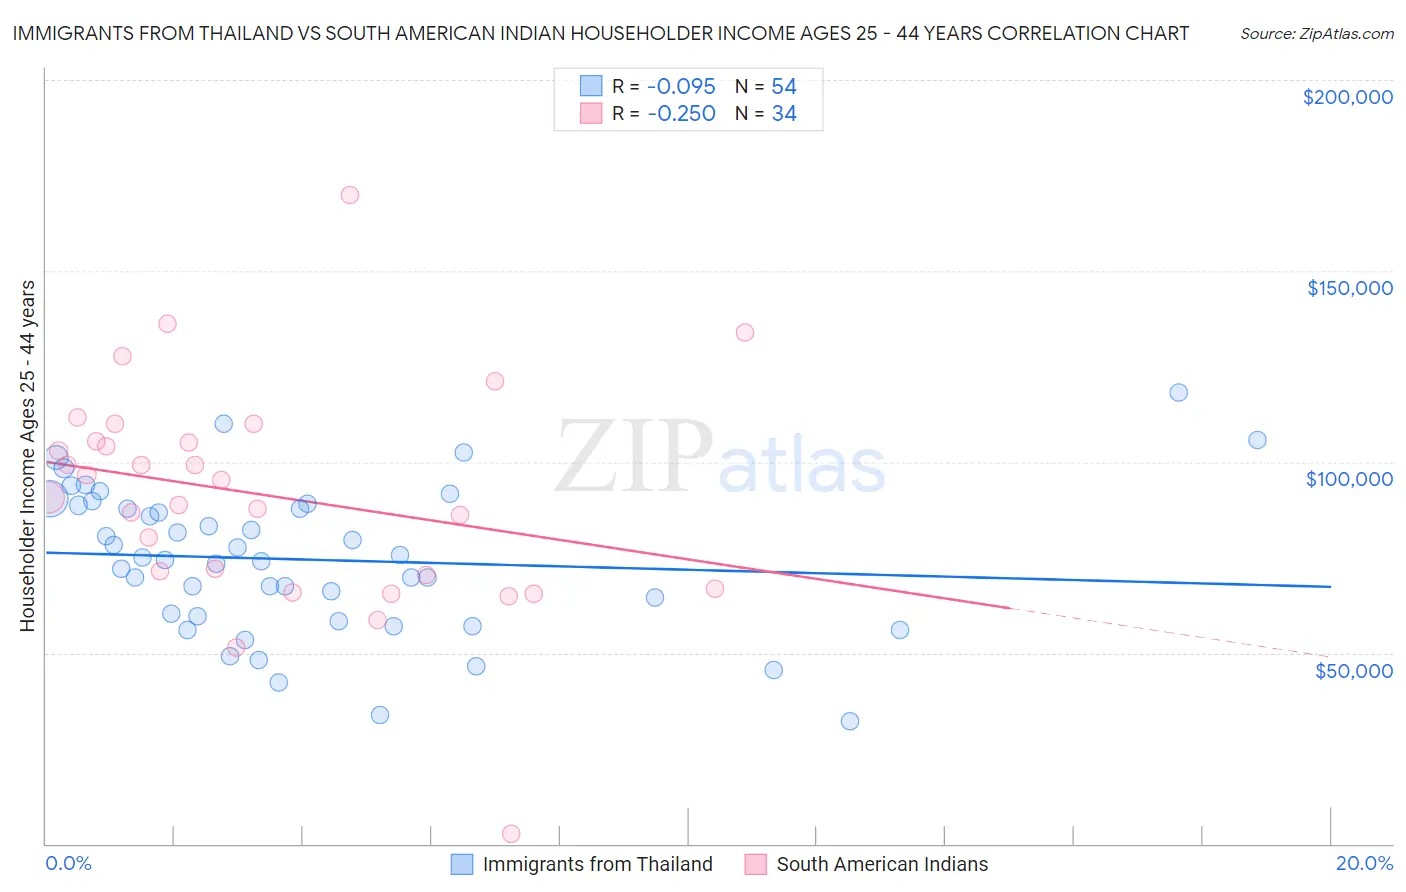 Immigrants from Thailand vs South American Indian Householder Income Ages 25 - 44 years